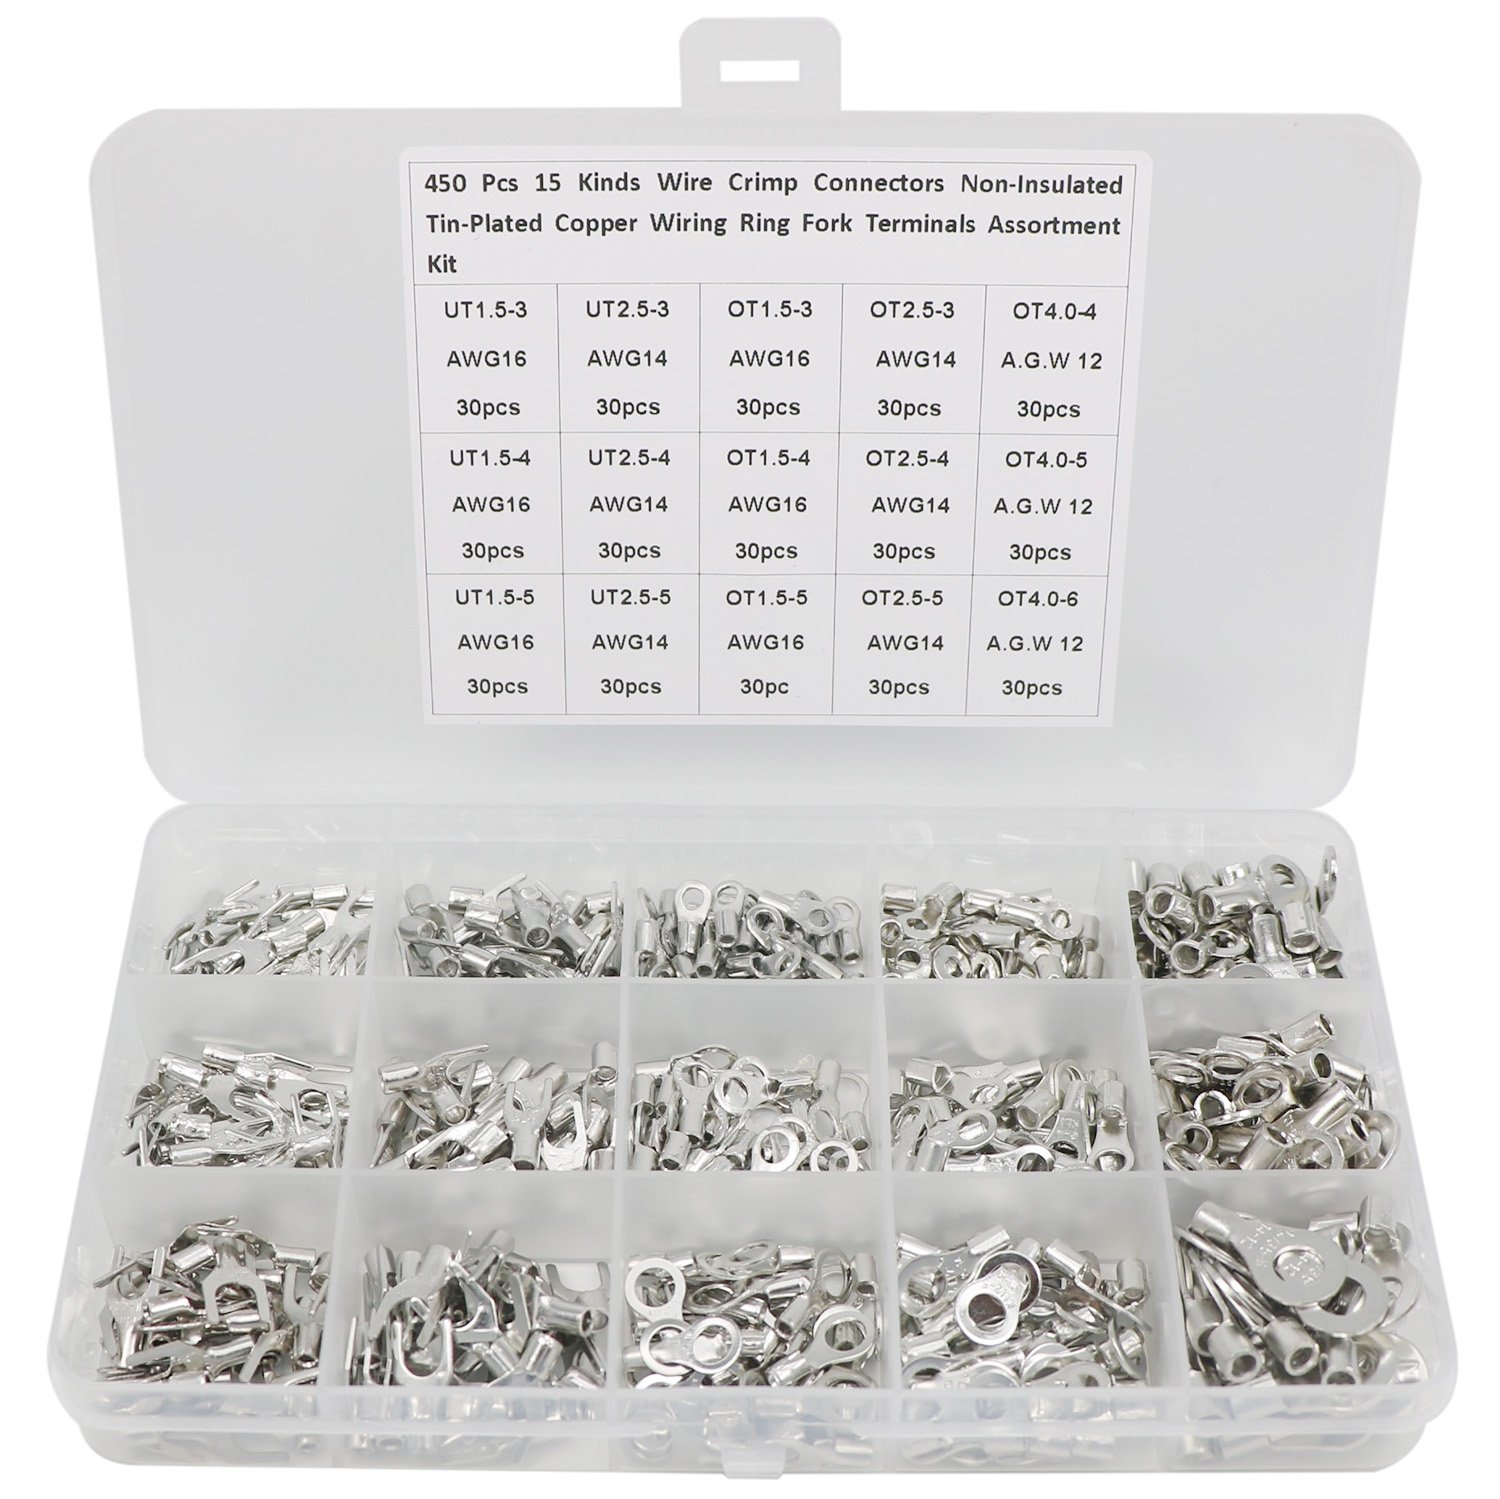 Generic 450Pcs 15 in 1 Crimp Terminal Non-Insulated Ring Fork U-Type Female Terminals Assortment Kit Cable Wire Connector Crimp Electri